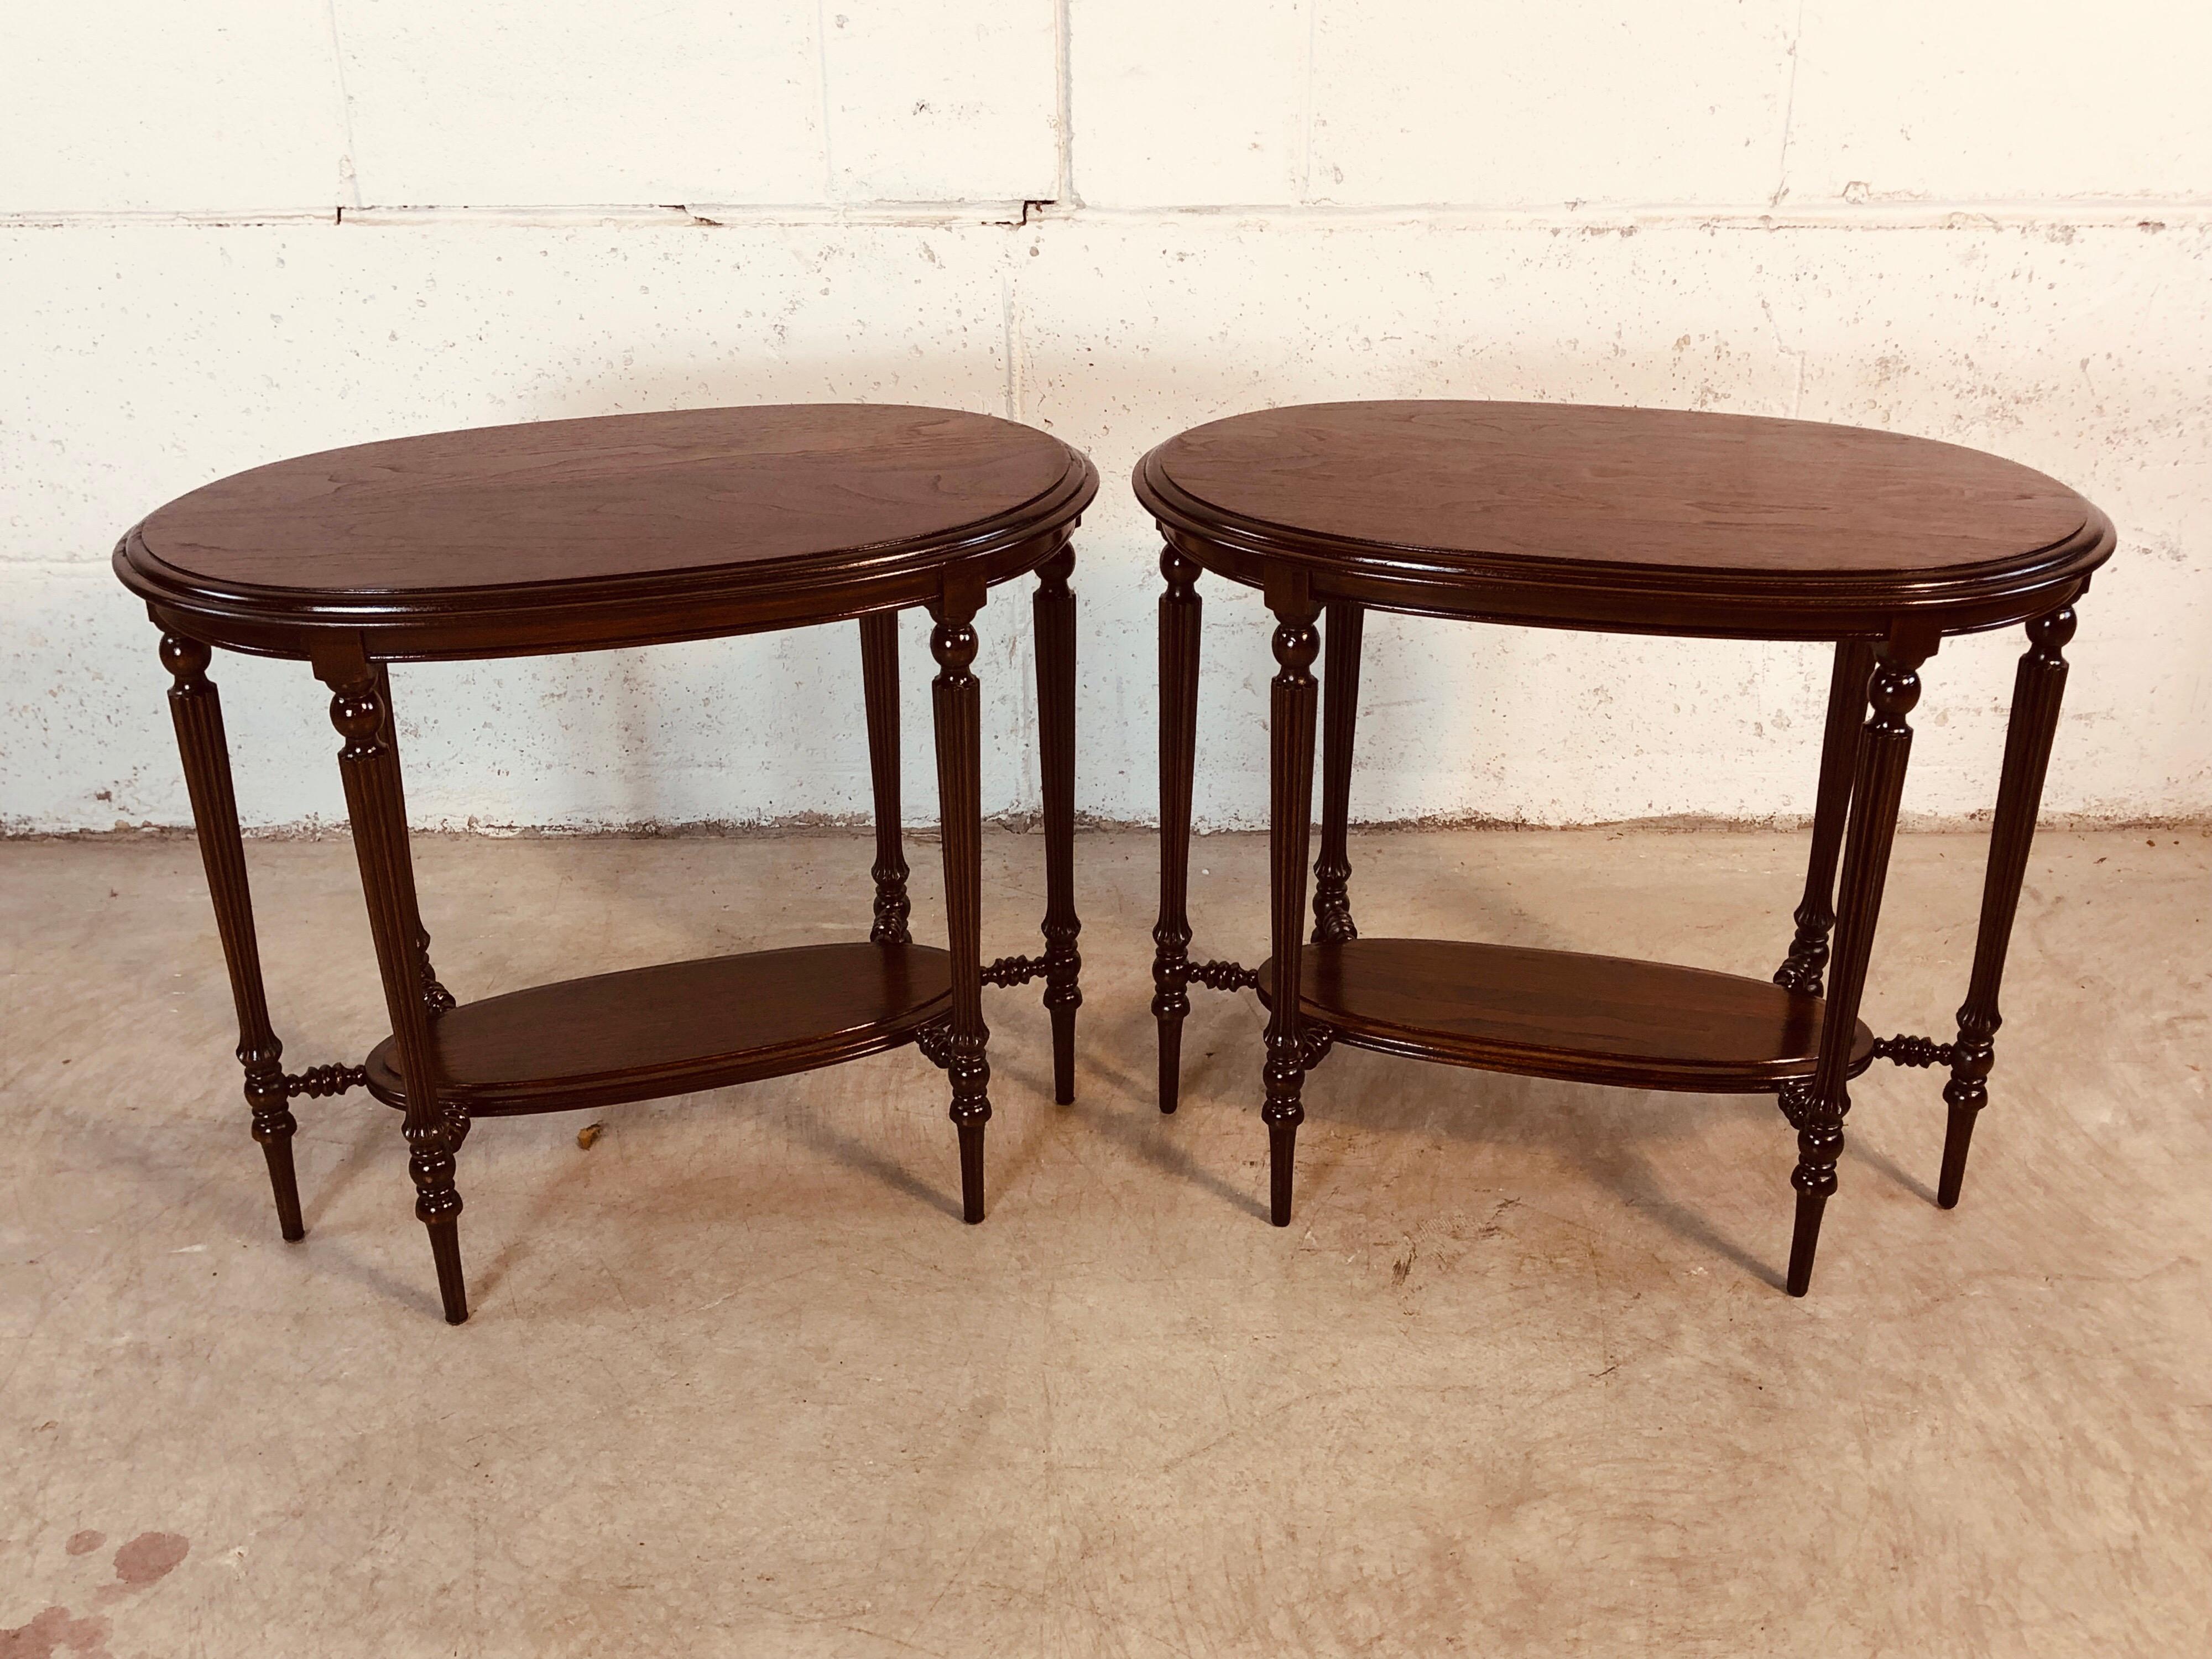 Late Victorian period pair of oval walnut wood side tables. The tables have a second shelf with turned supports. The legs are carved and end with delicate feet. The tables have been refinished and restored. There is no maker’s mark.